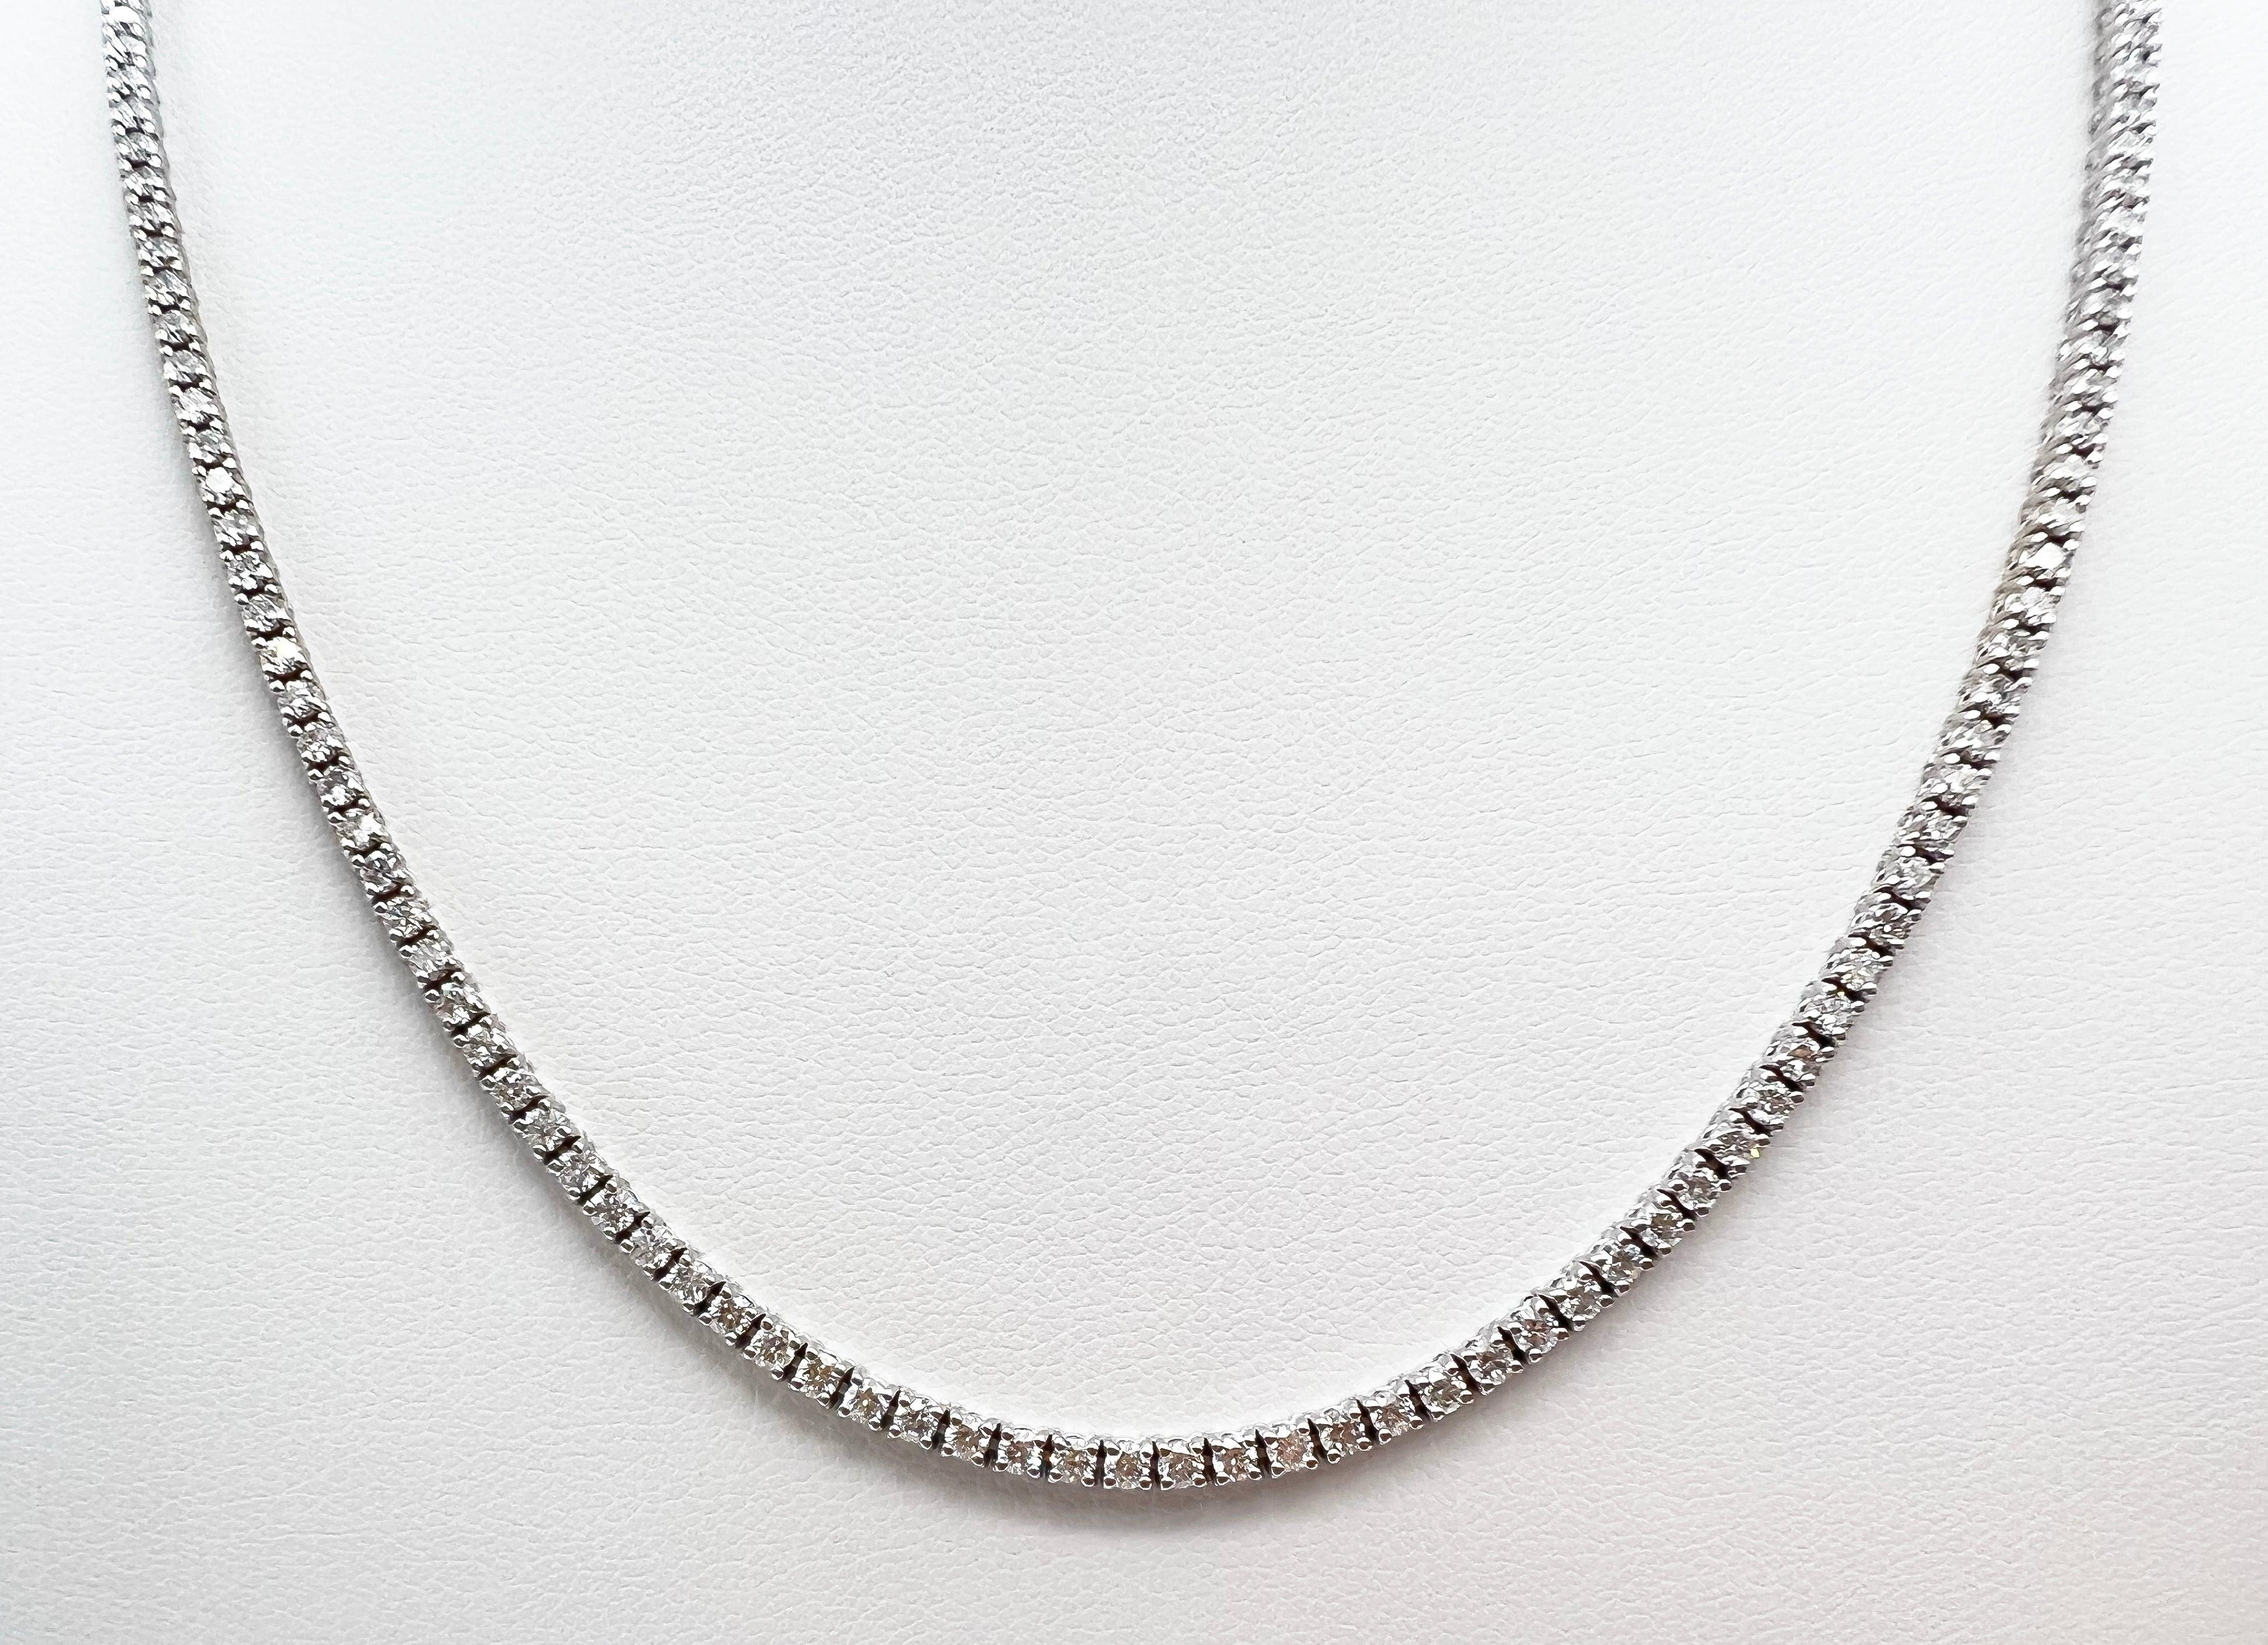 4.75 Carat Diamond Tennis Necklace with Round Diamonds in White Gold Chain

Tennis necklaces are the epitome of versatility and elegance. Here we have a classic, timeless piece that you could wear it everyday or only on occasions, alone or paired